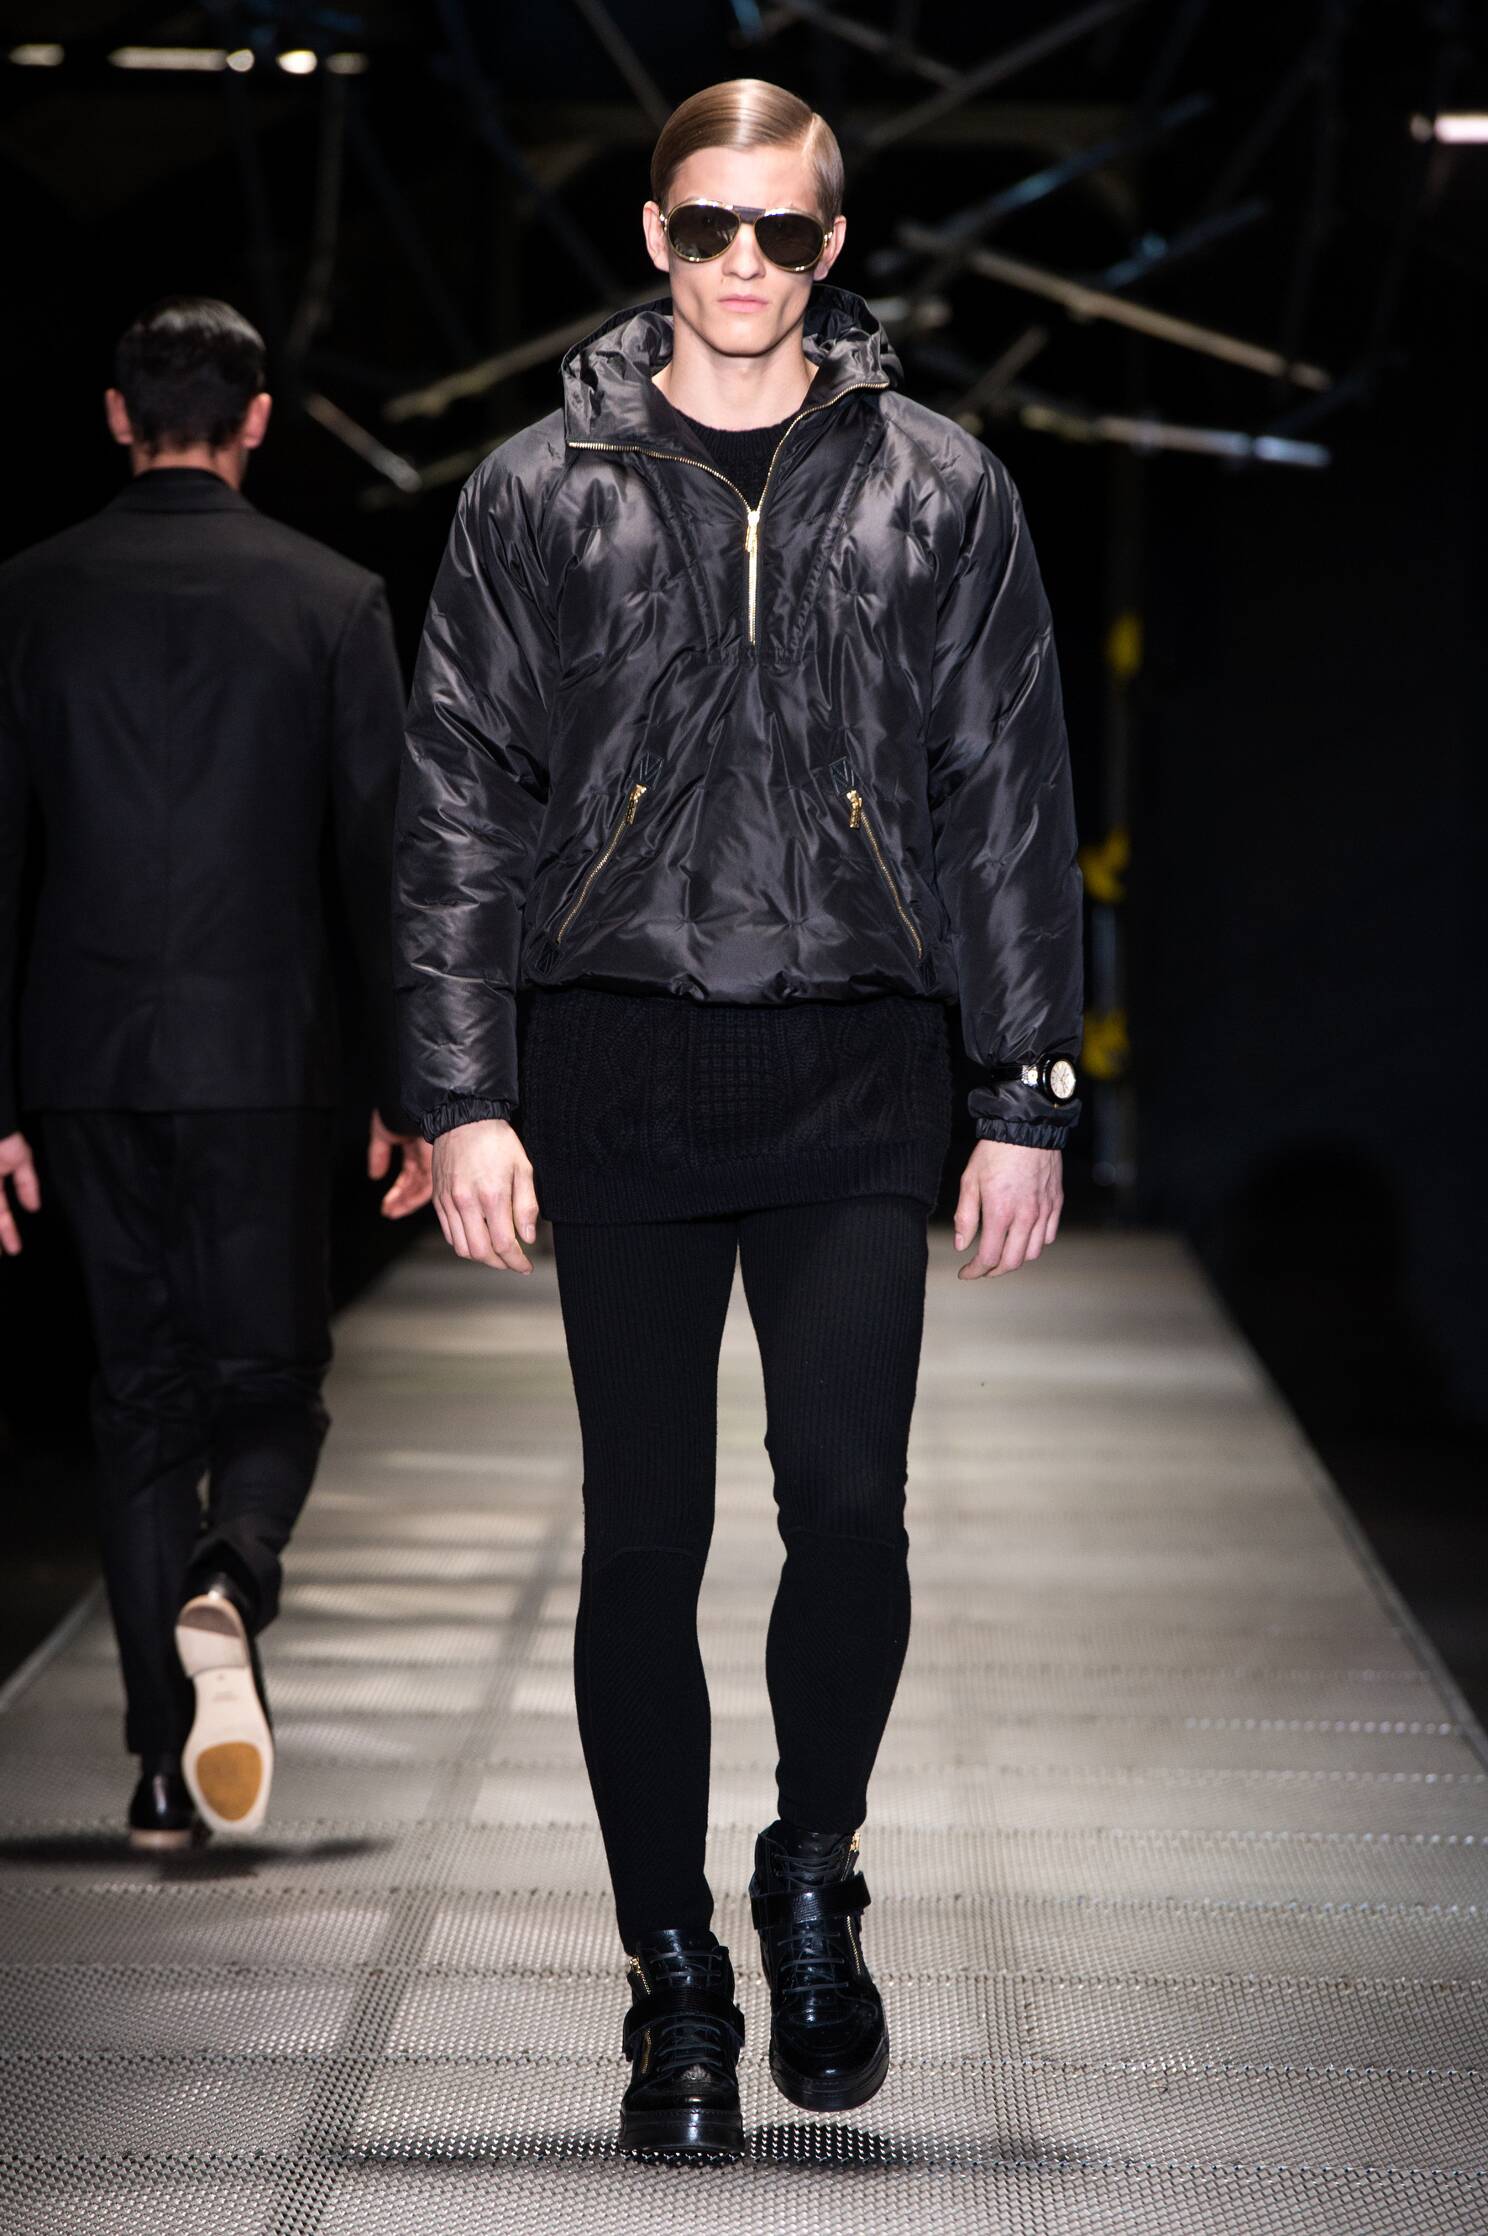 VERSACE FALL WINTER 2015 MEN'S COLLECTION | The Skinny Beep